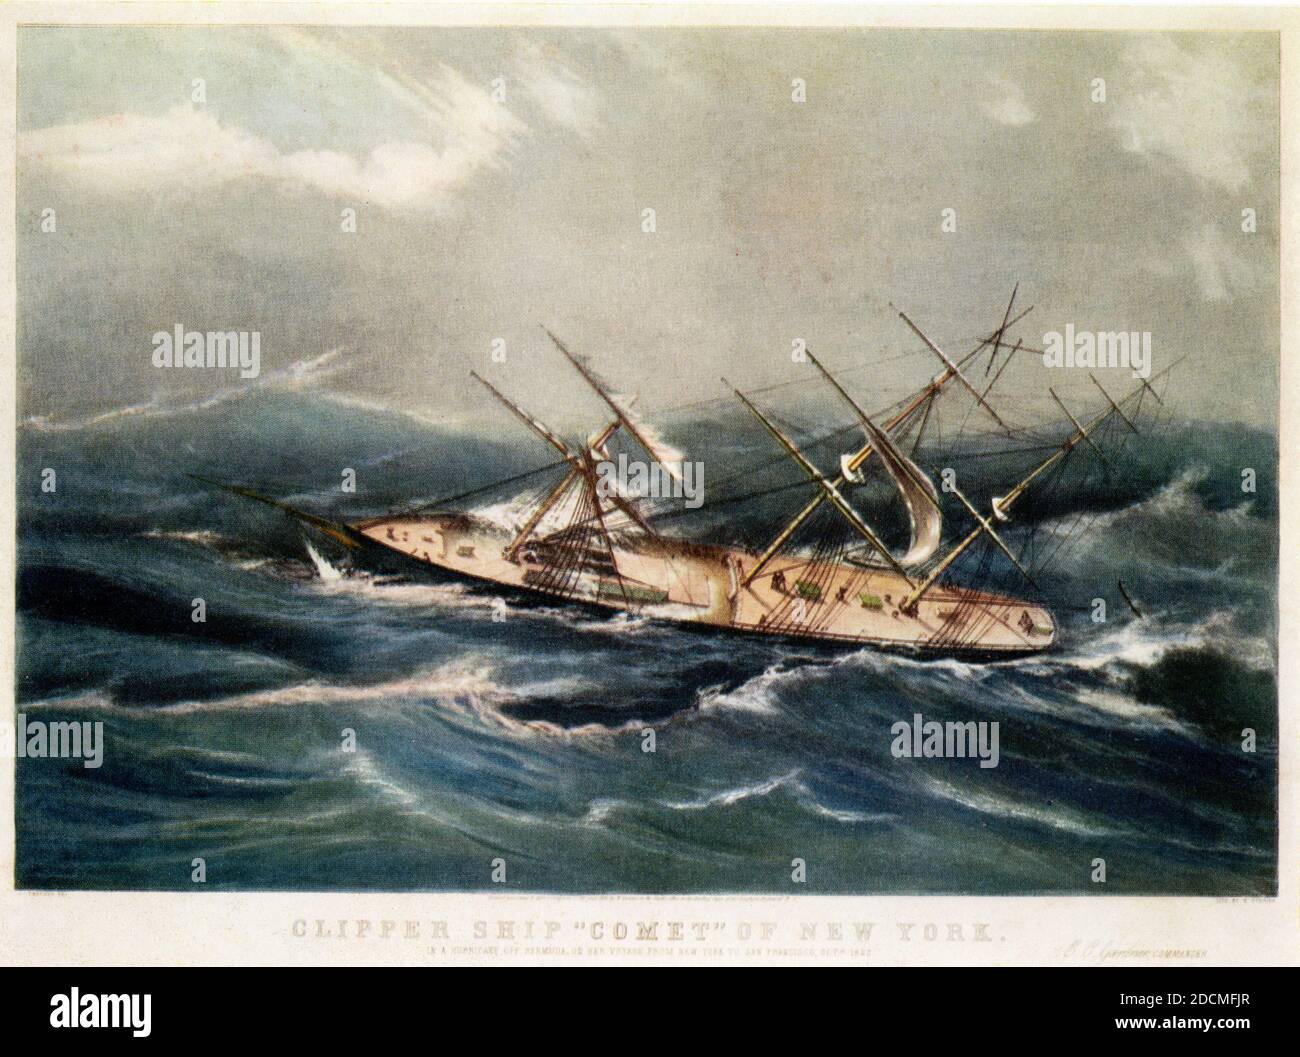 Clipper Ship 'Comet' of New York in a hurricane off Bermuda on voyage from New York to San Francisco October 2 1852 E C Gardner commander C Parsons publisher N Currier 1855 Stock Photo